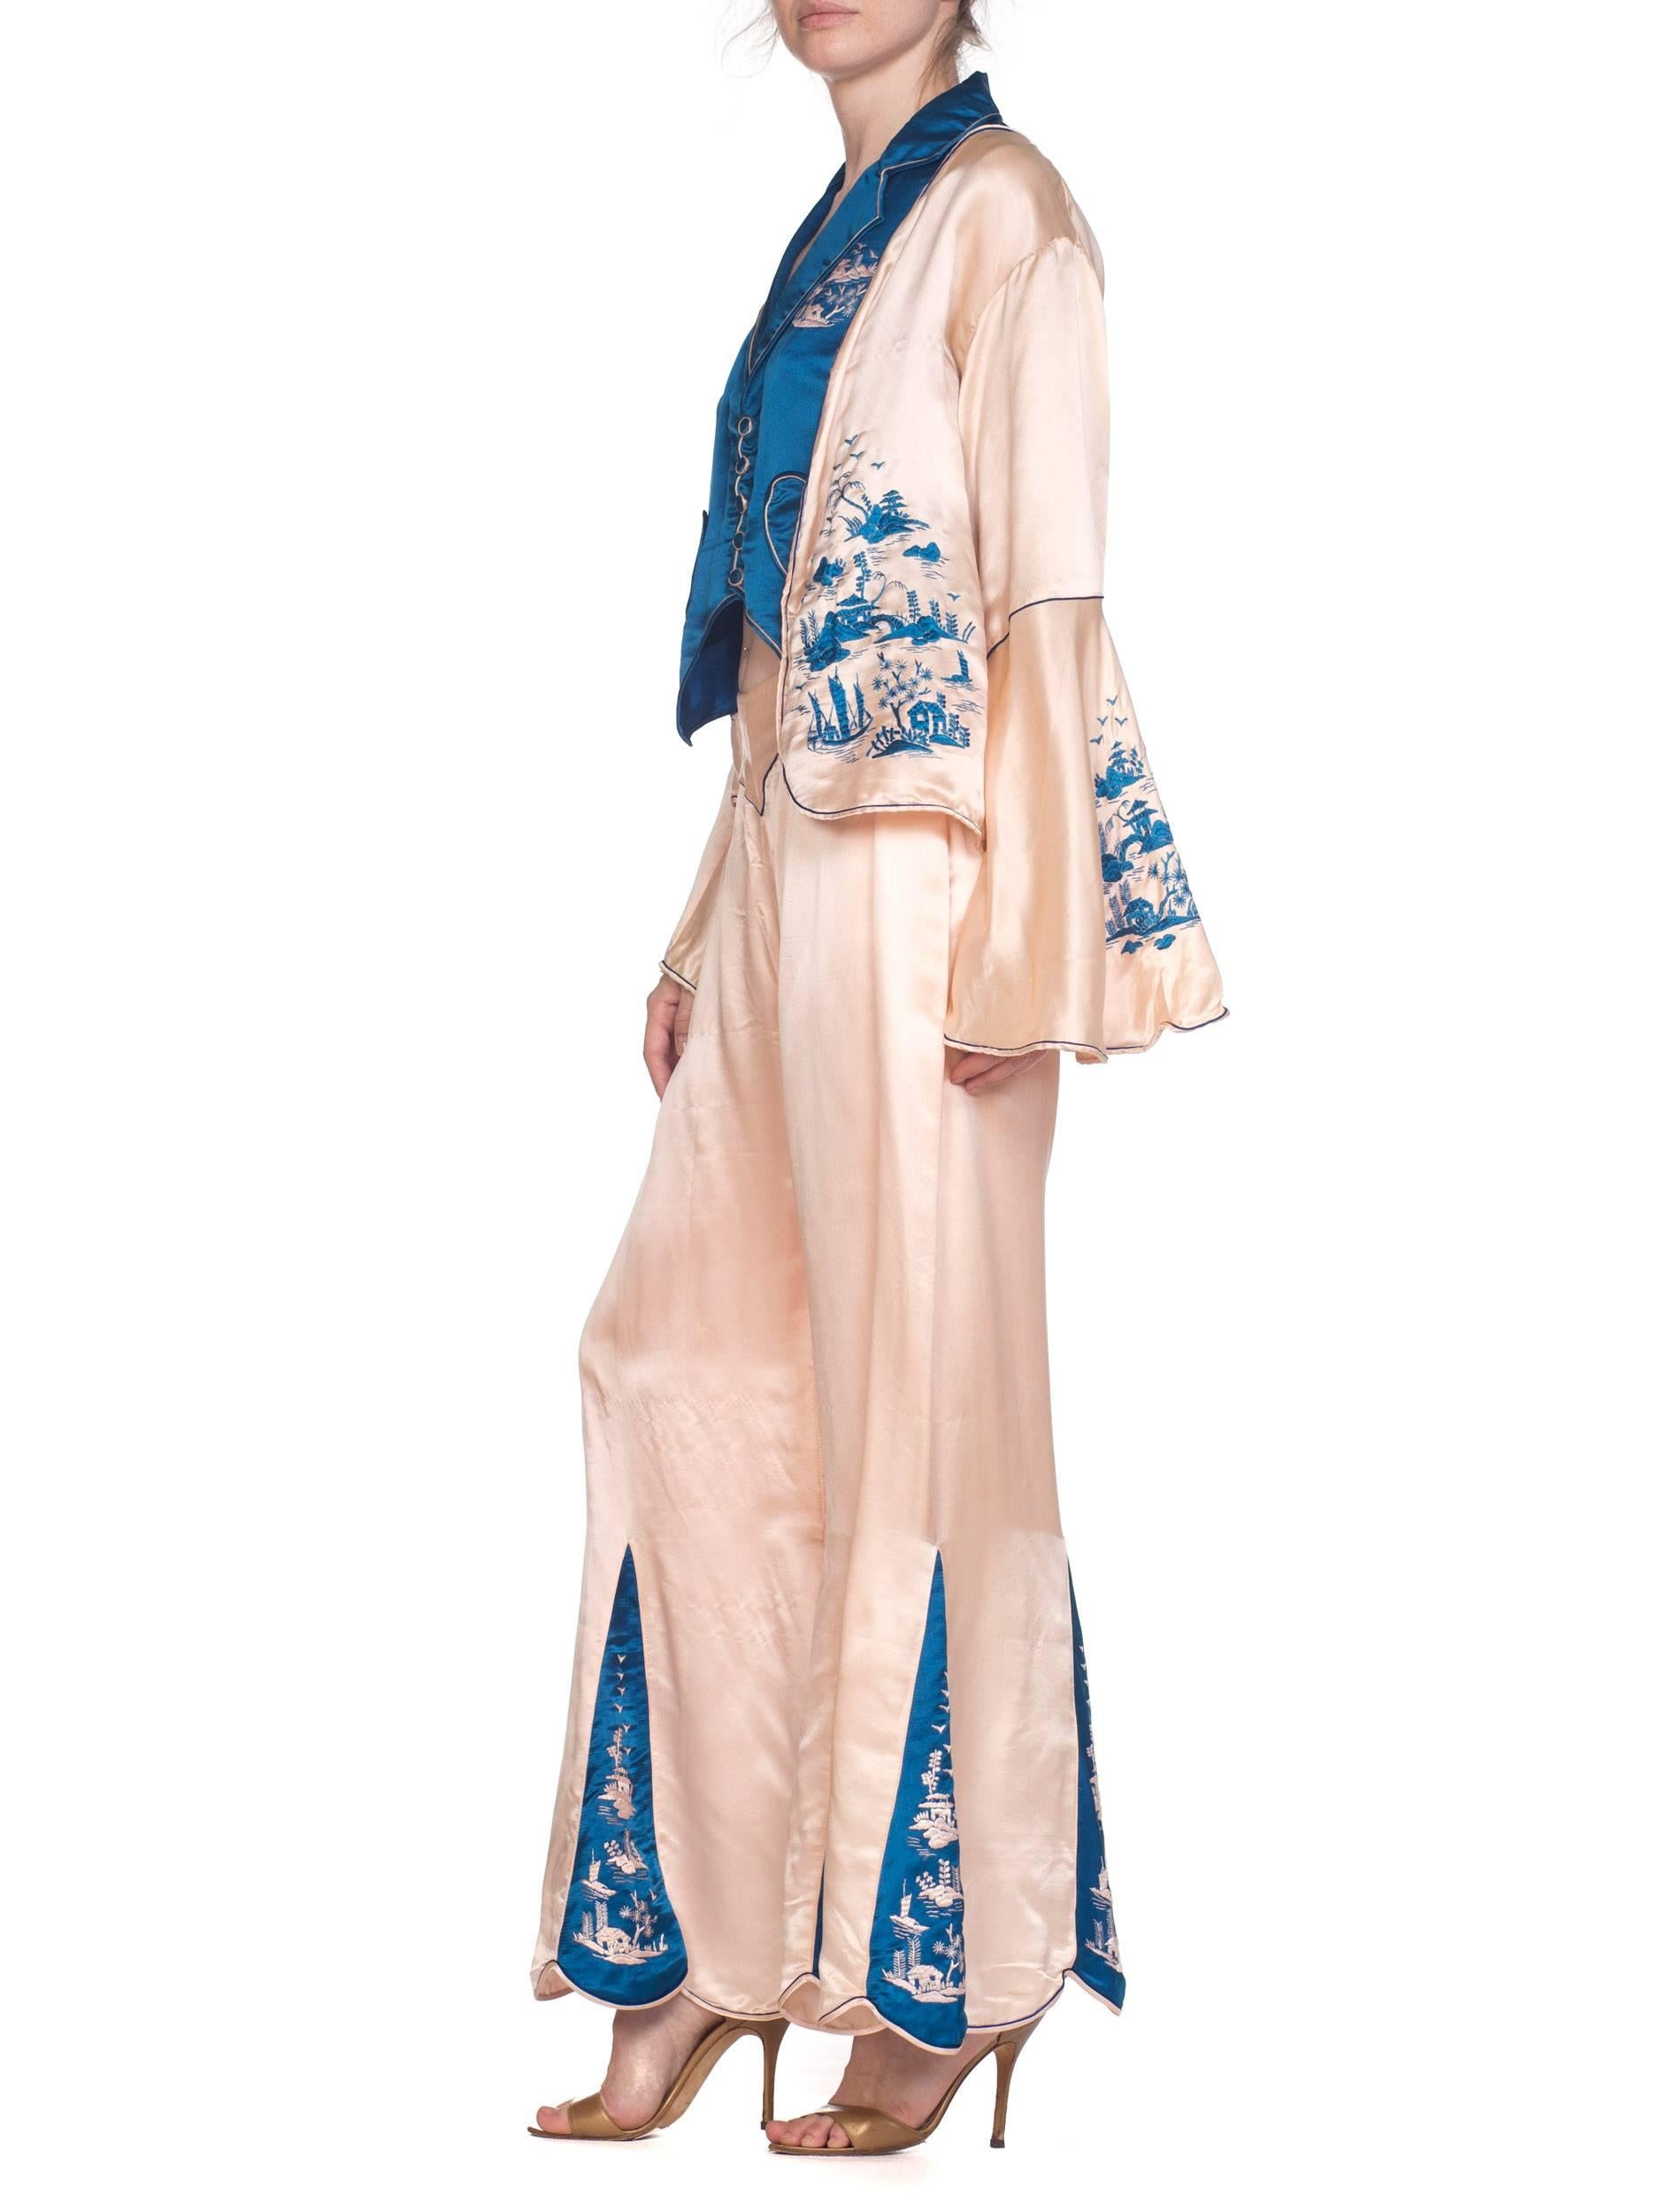 1920s 3 Piece Blue and Cream Chinese Beach Pajamas With Hand Embroidery 4